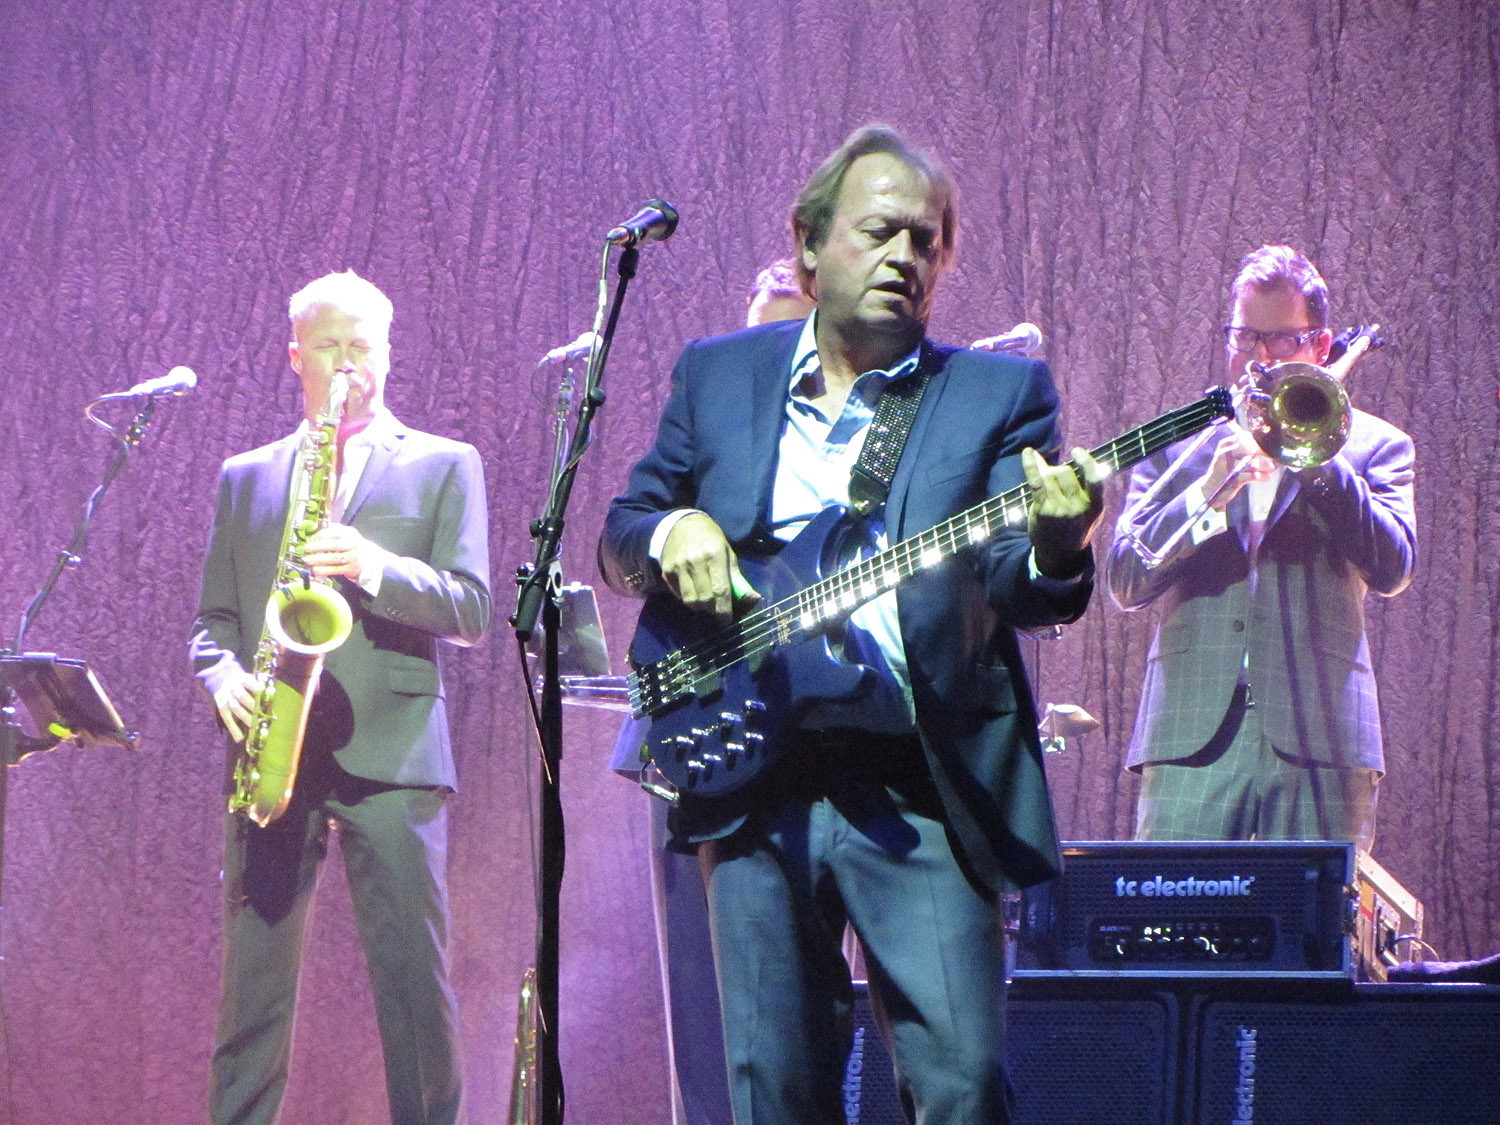 LEVEL 42 – The Lowry, Salford, 4 October 2016